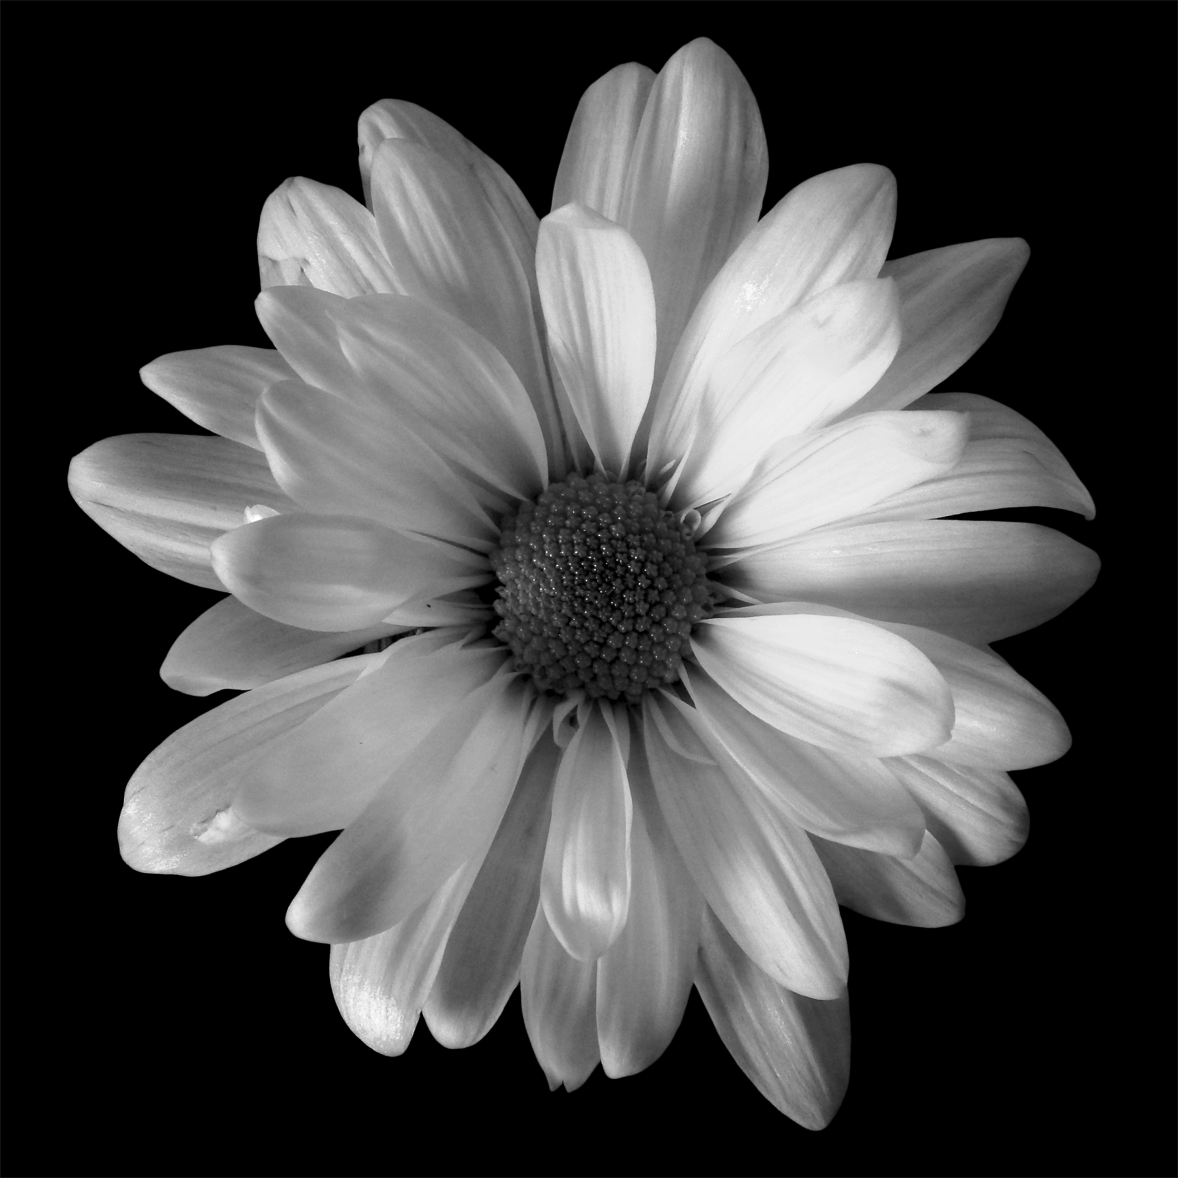 Floral Pictures Black And White : Black And White Art Wallpapers